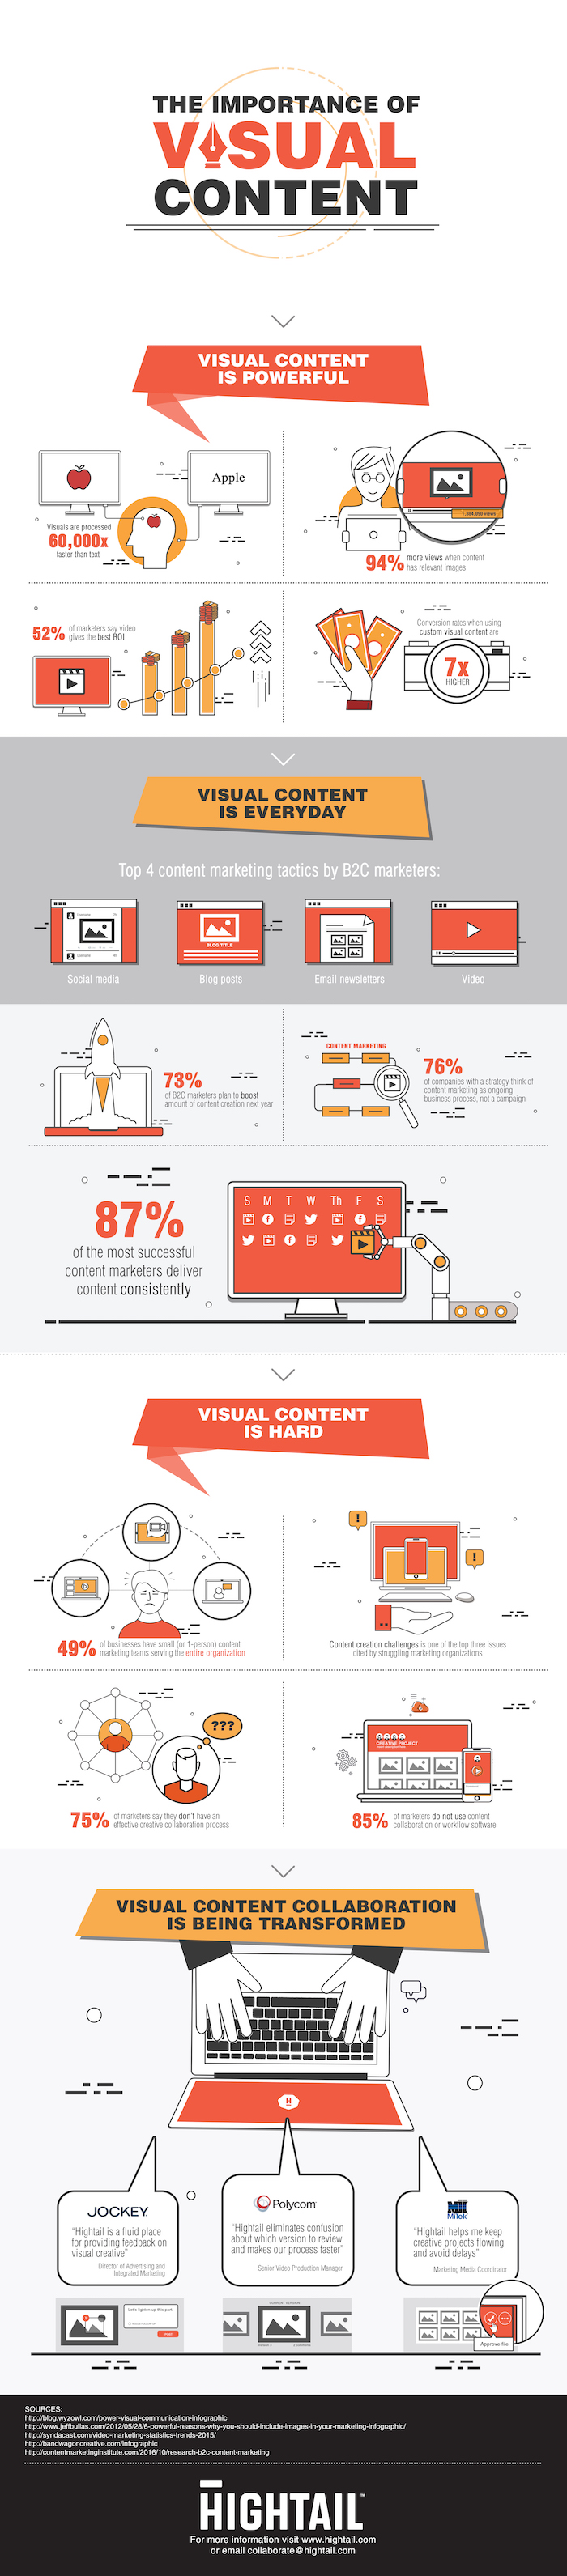 Content Marketing Institute report Hightail infographic